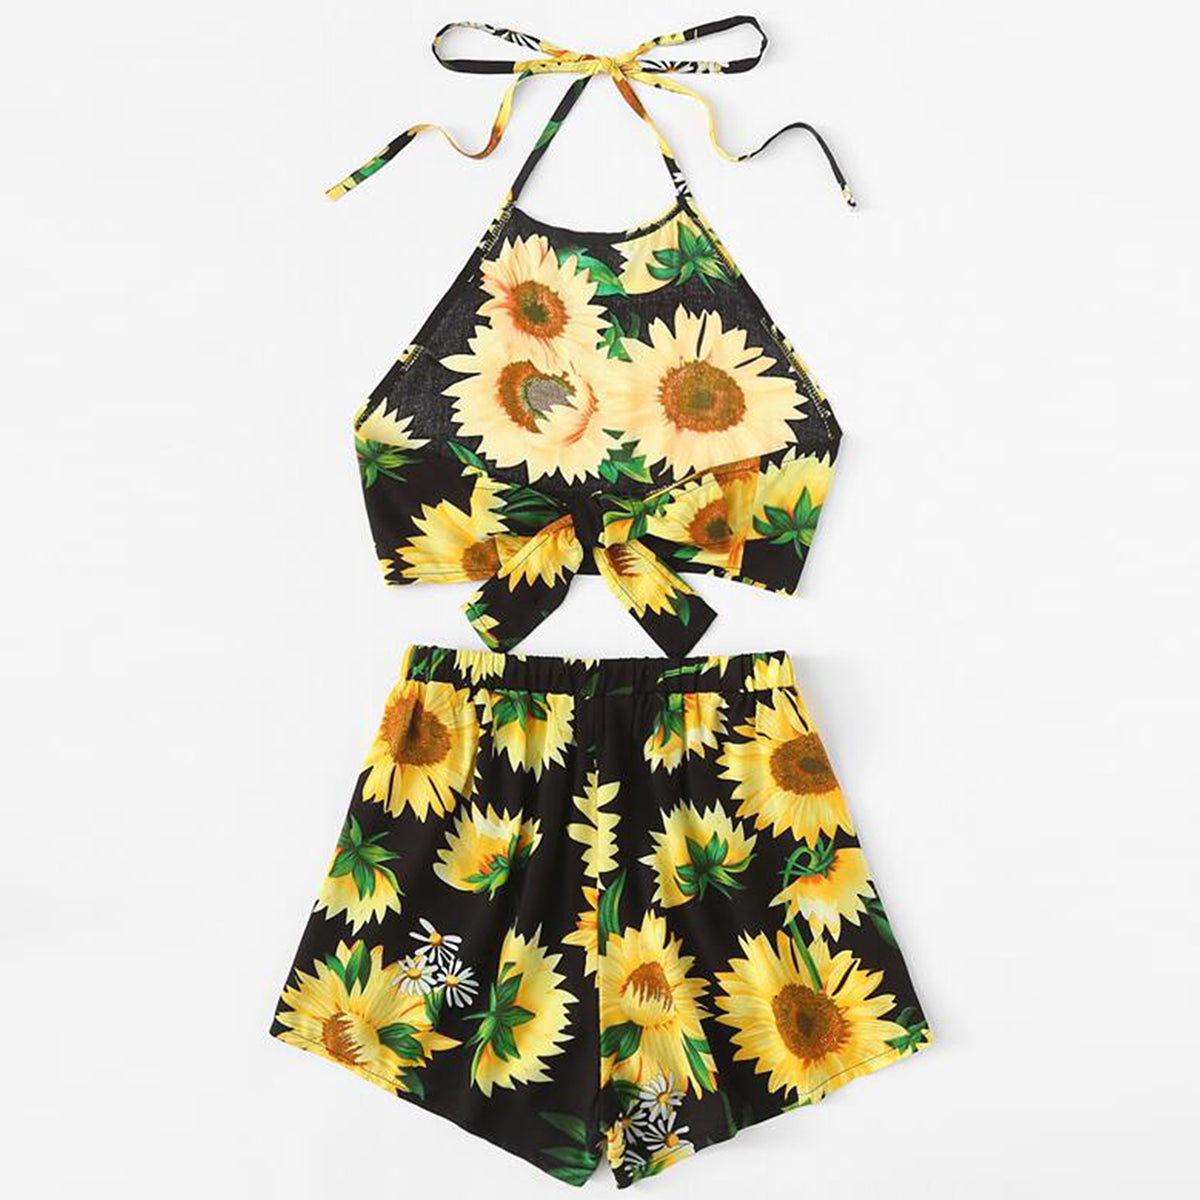 Stylish Cotton Yellow Flower Design Top & Shorts for Kids.